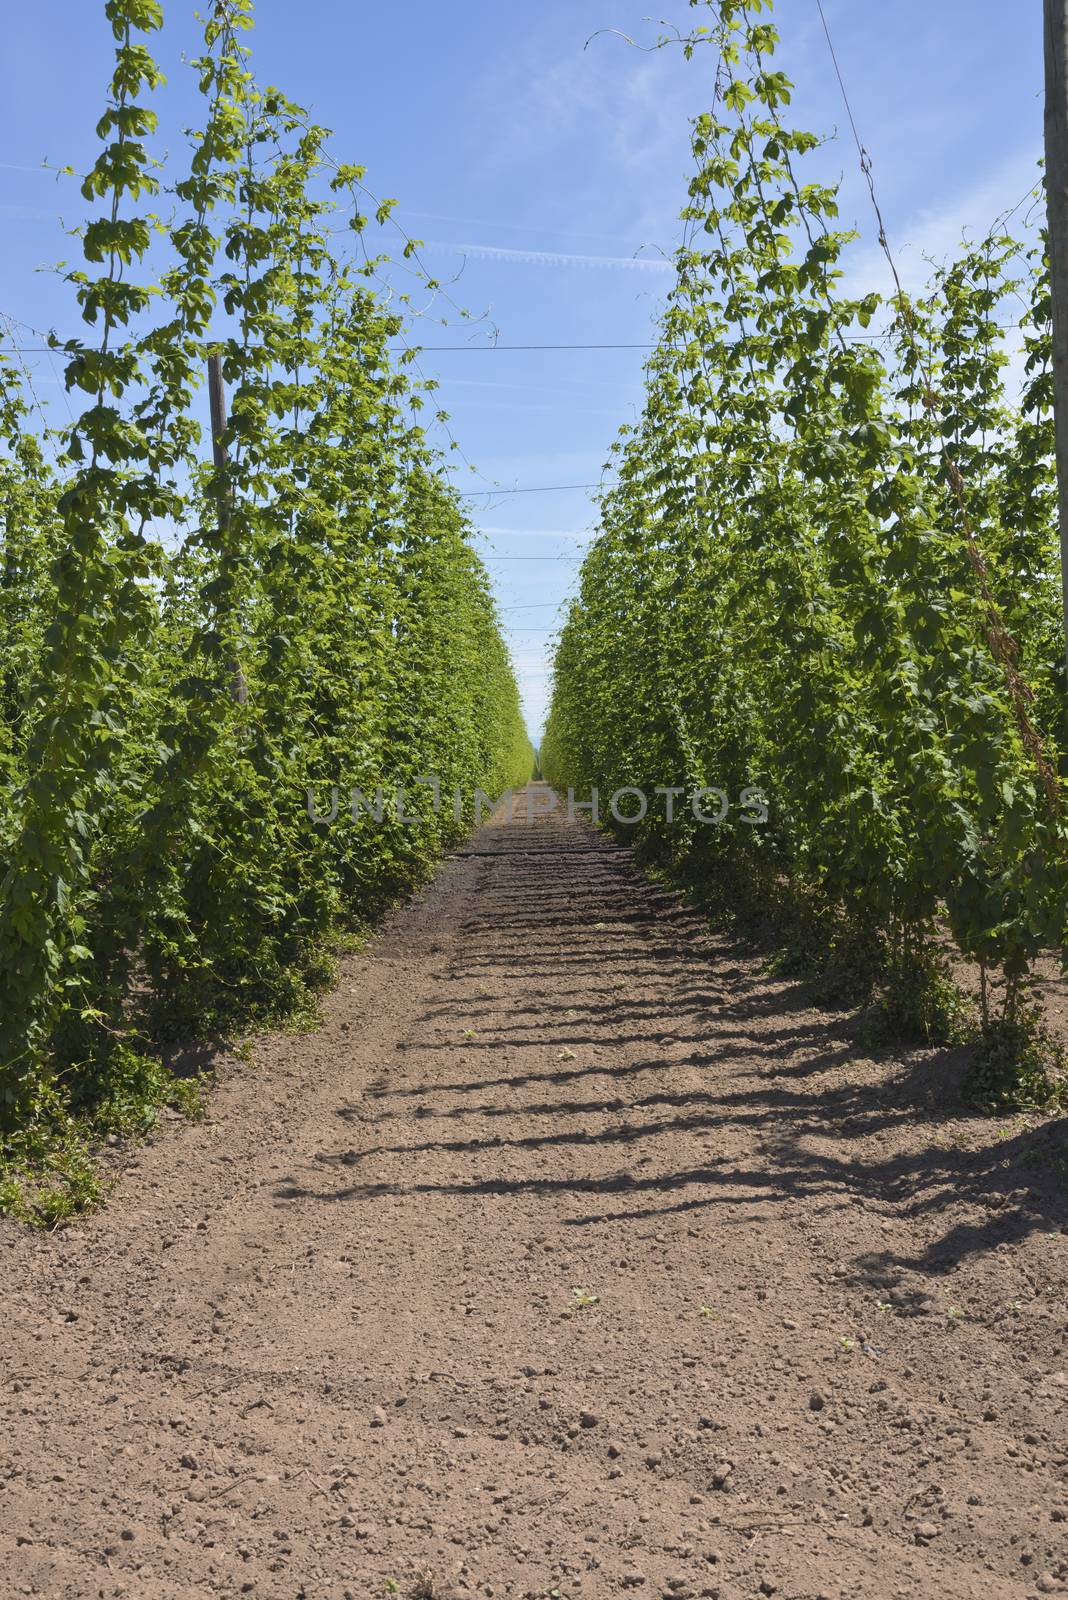 Agriculture and farming of hops in Oregon. by Rigucci